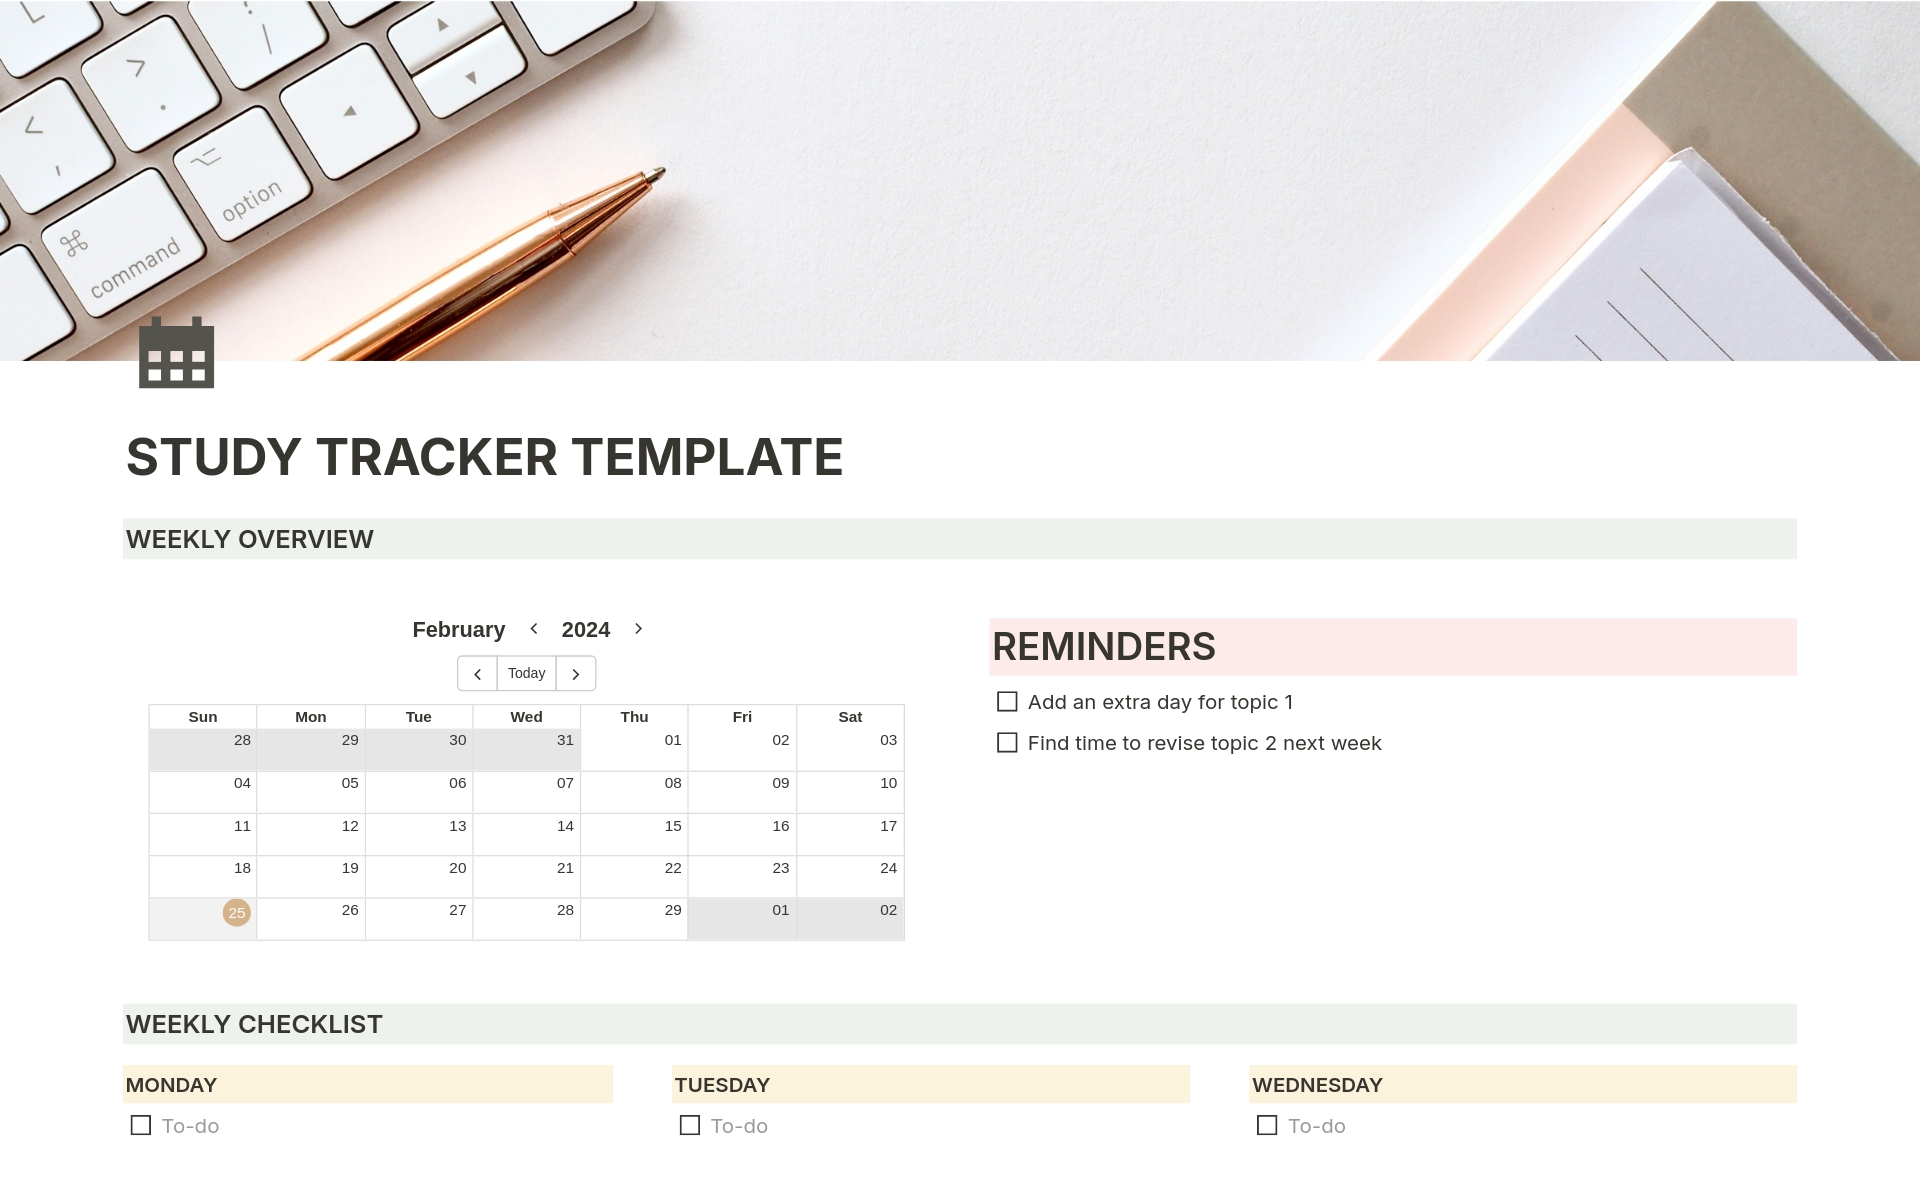 This is the perfect study tracker/calendar to help you plan and execute your study goals and never fall behind. Have fun studying!